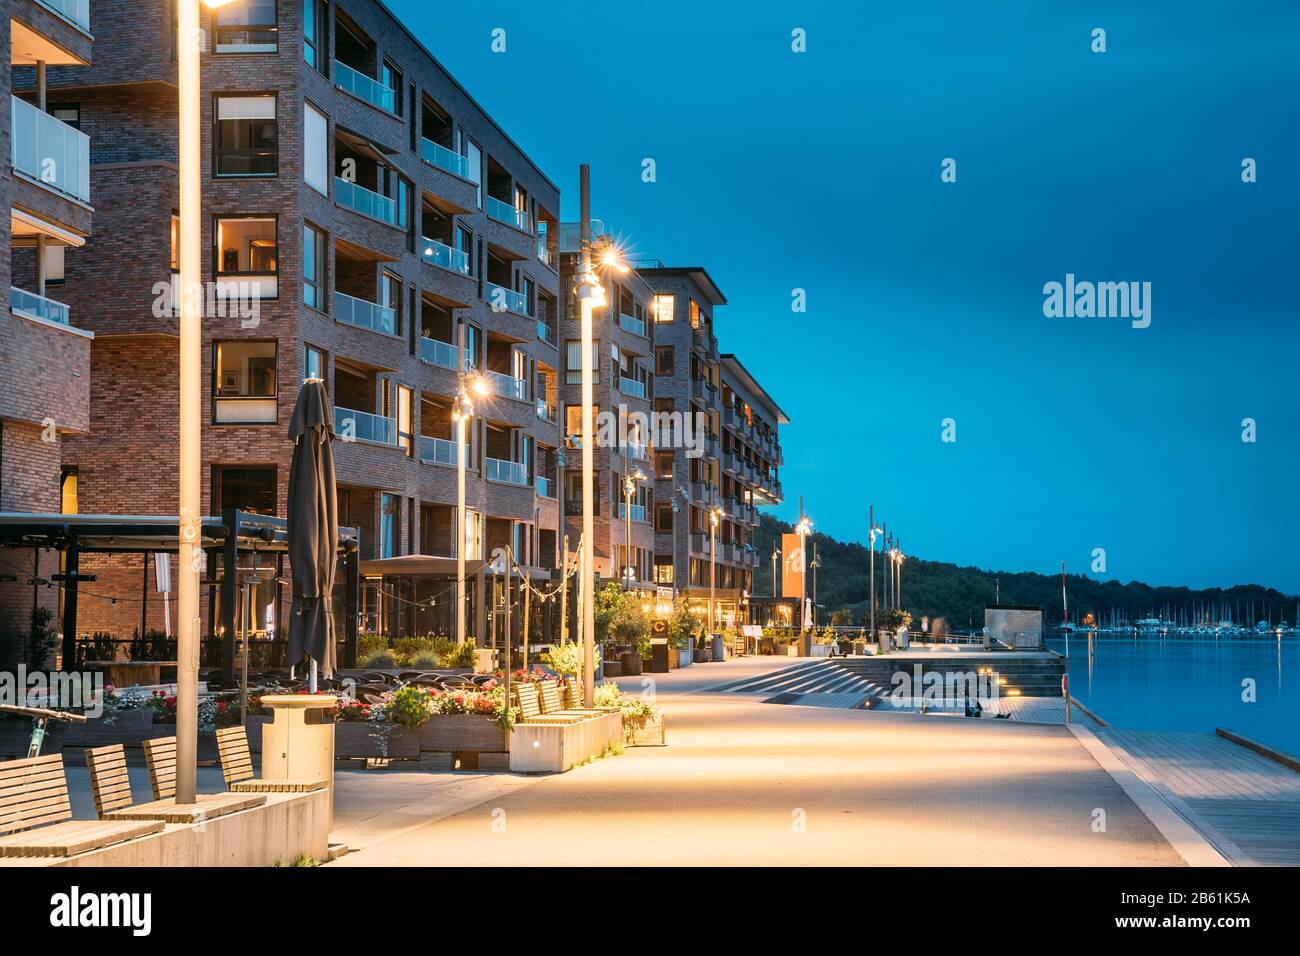 Oslo, Norway - June 24, 2019: Night View Embankment And Residential Multi-storey House On Sorengkaia Street In Gamle Oslo District. Residential Area I Stock Photo